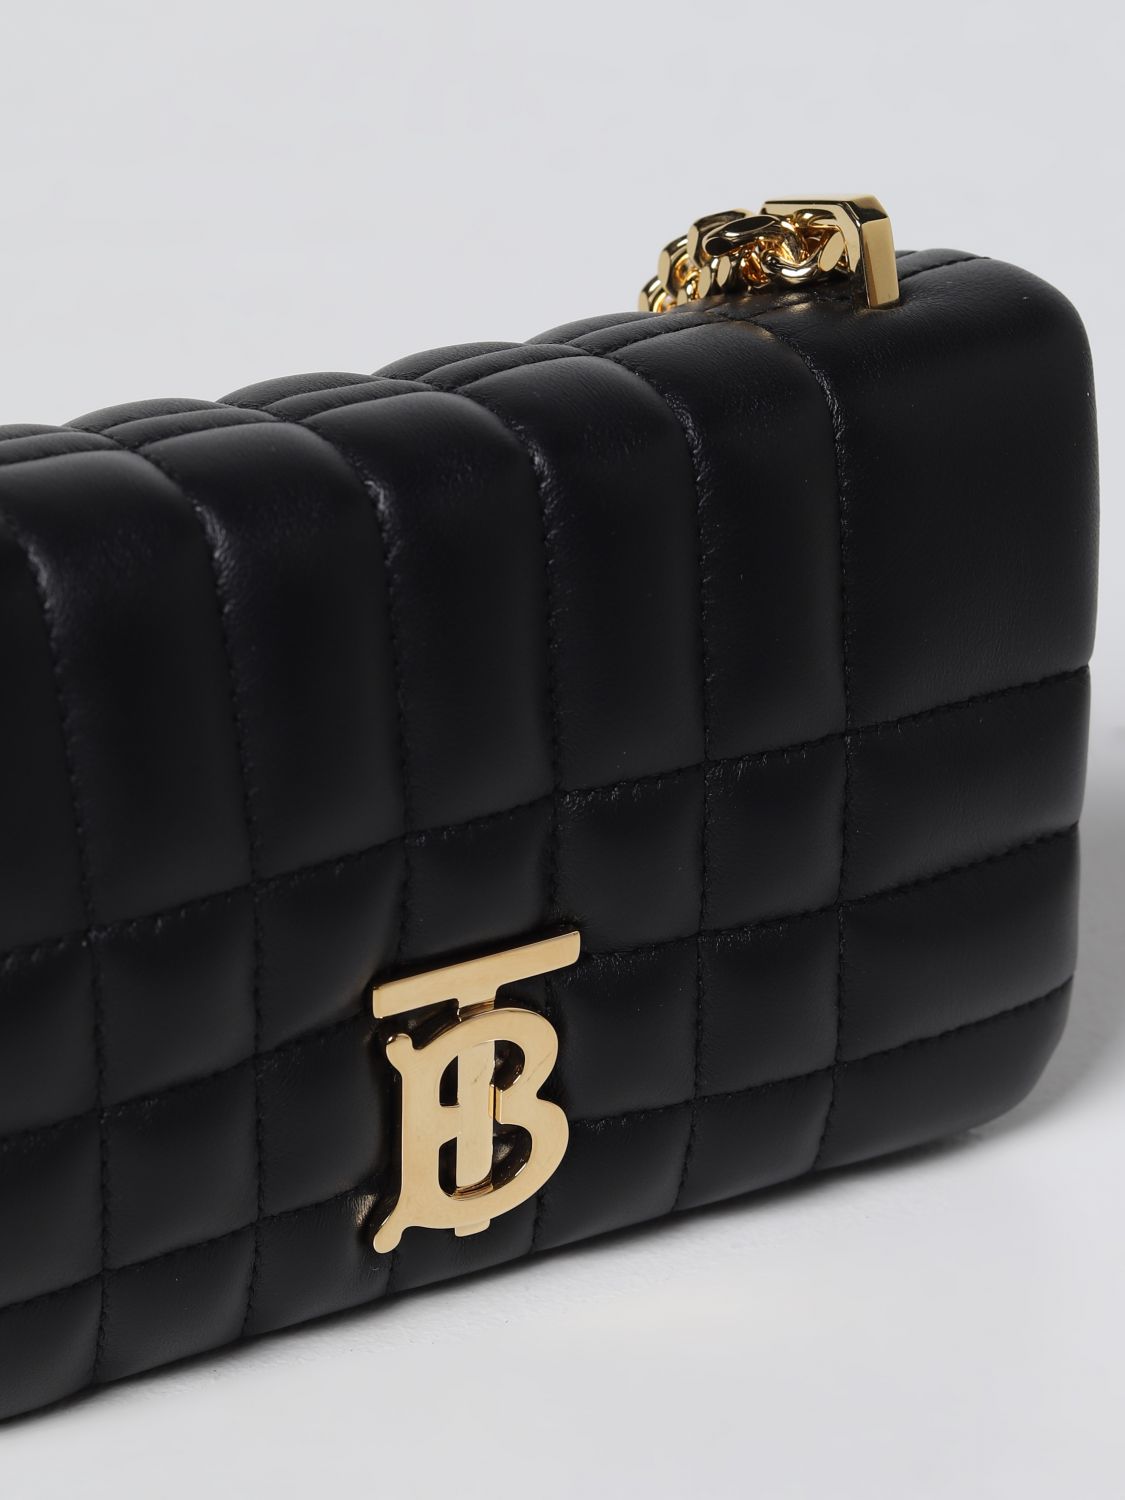 BURBERRY: Lola bag in quilted nappa leather - Black  Burberry shoulder bag  8059492 online at